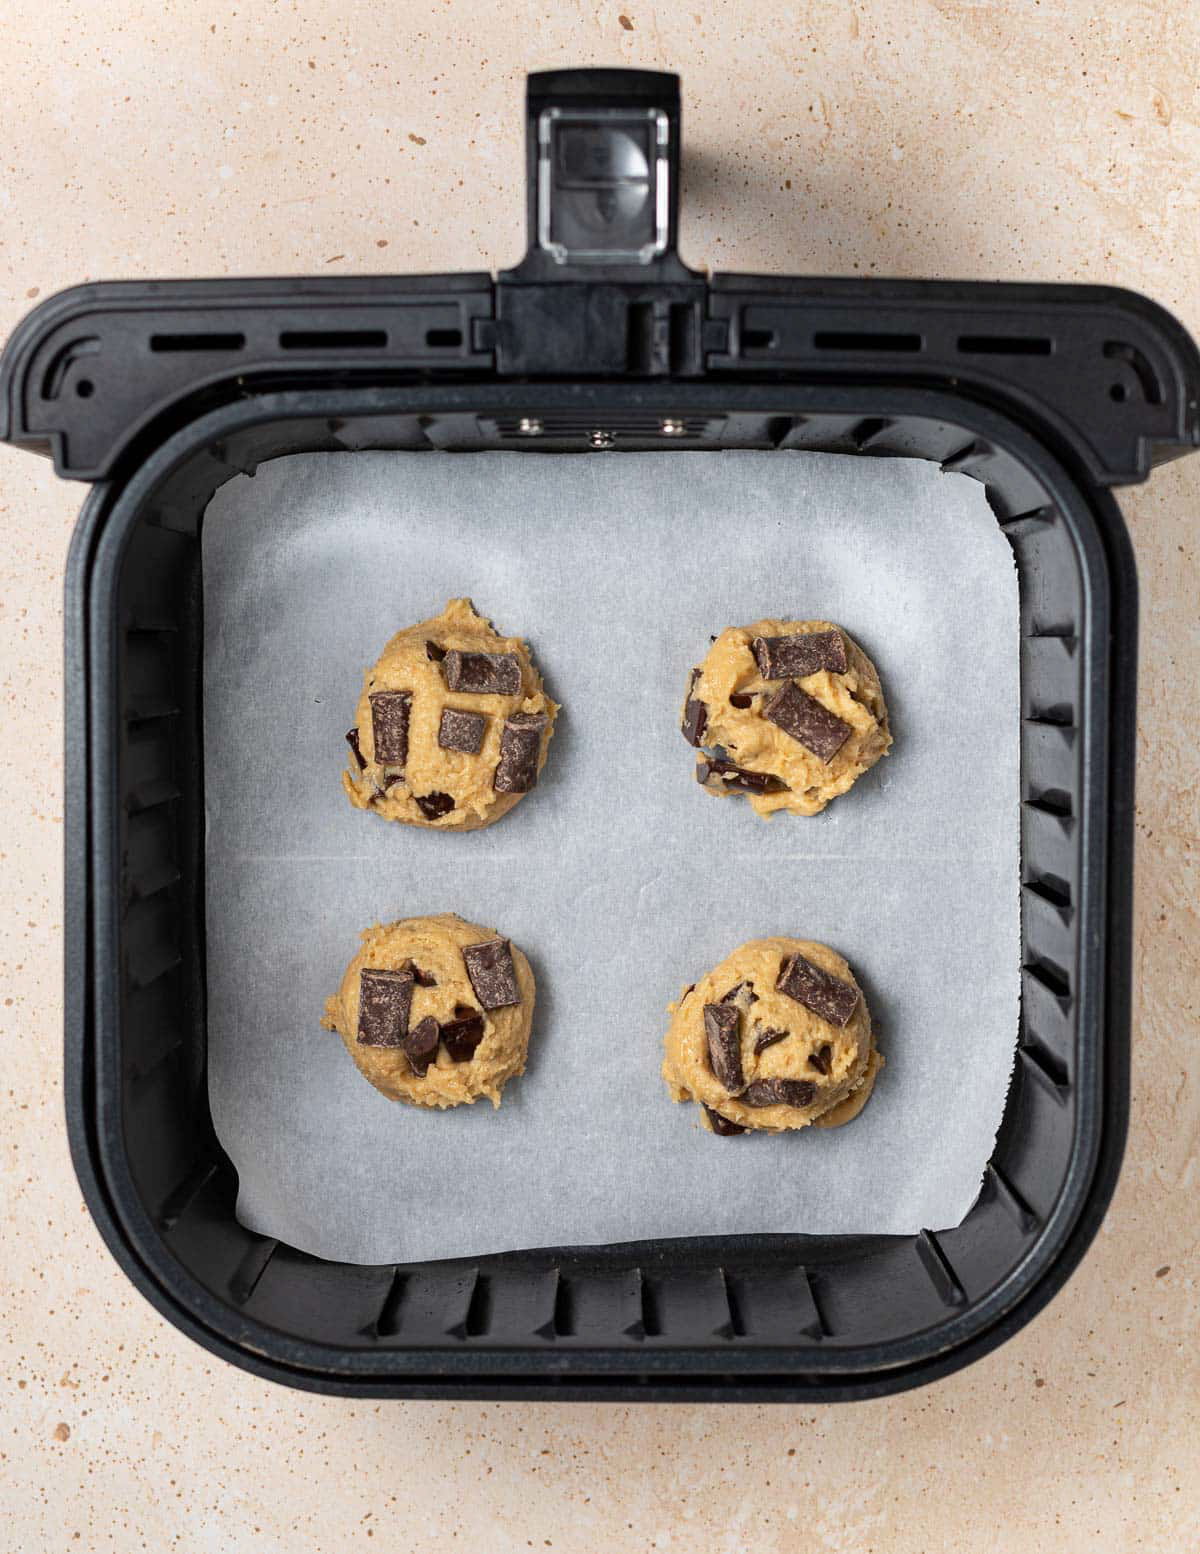 An overhead view of an open air fryer containing four cookies placed on a parchment paper. 